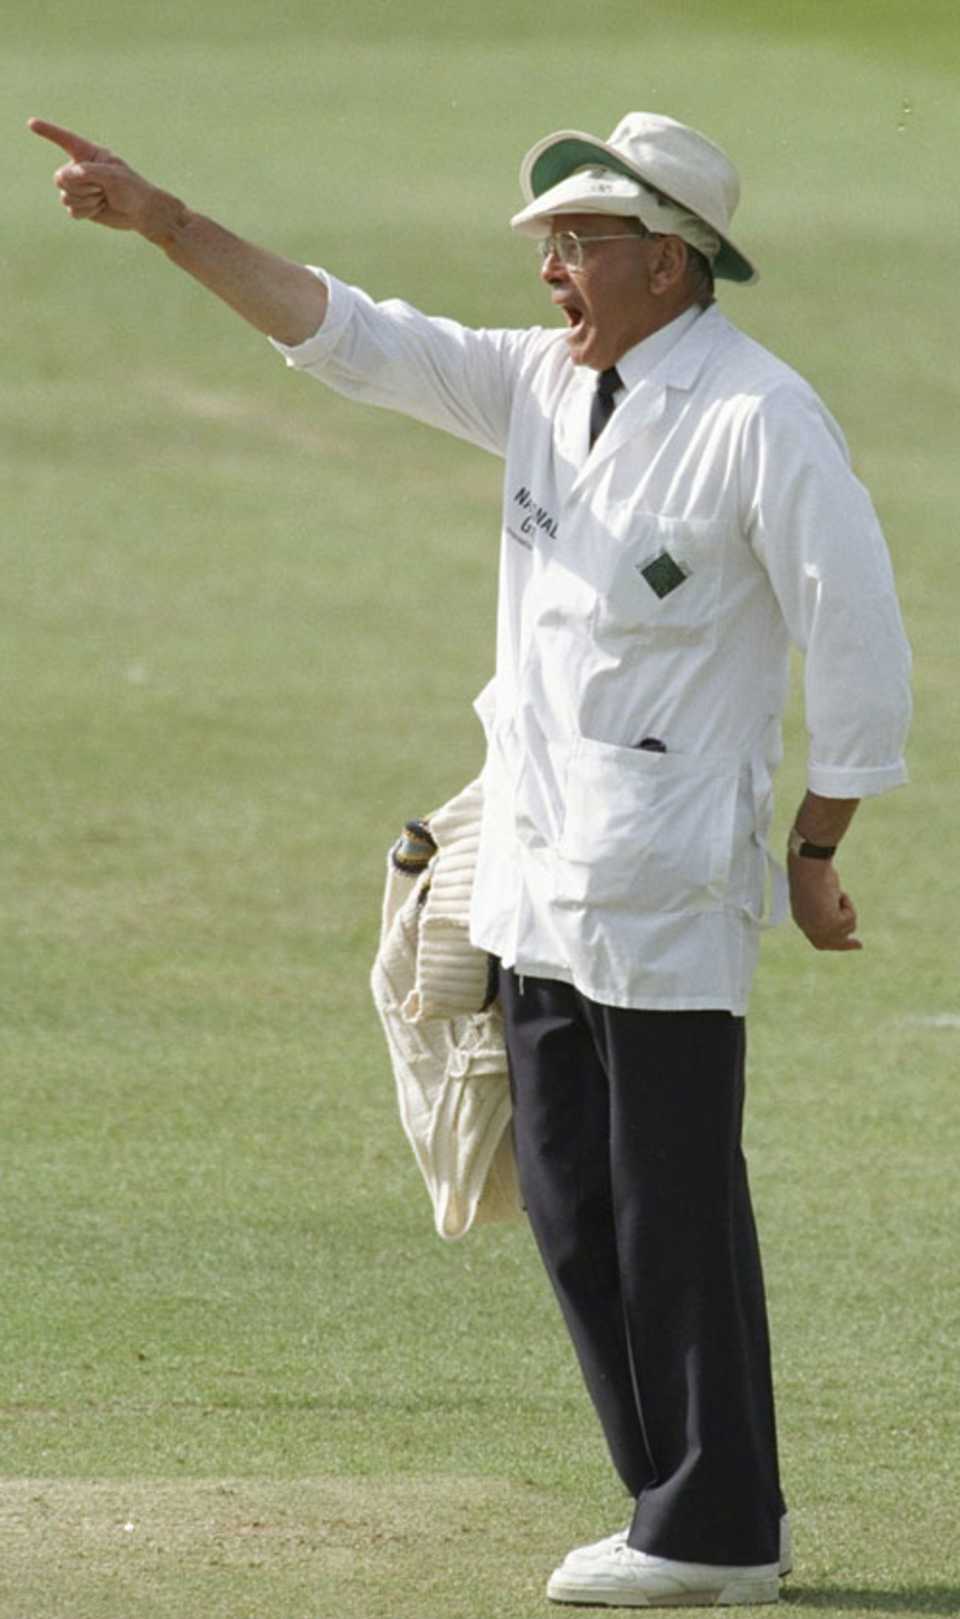 Dickie Bird gives his last decision in a Test as Man of the Match Jack Russell is out lbw, England v India, 2nd Test, Lord's, June 24, 1996